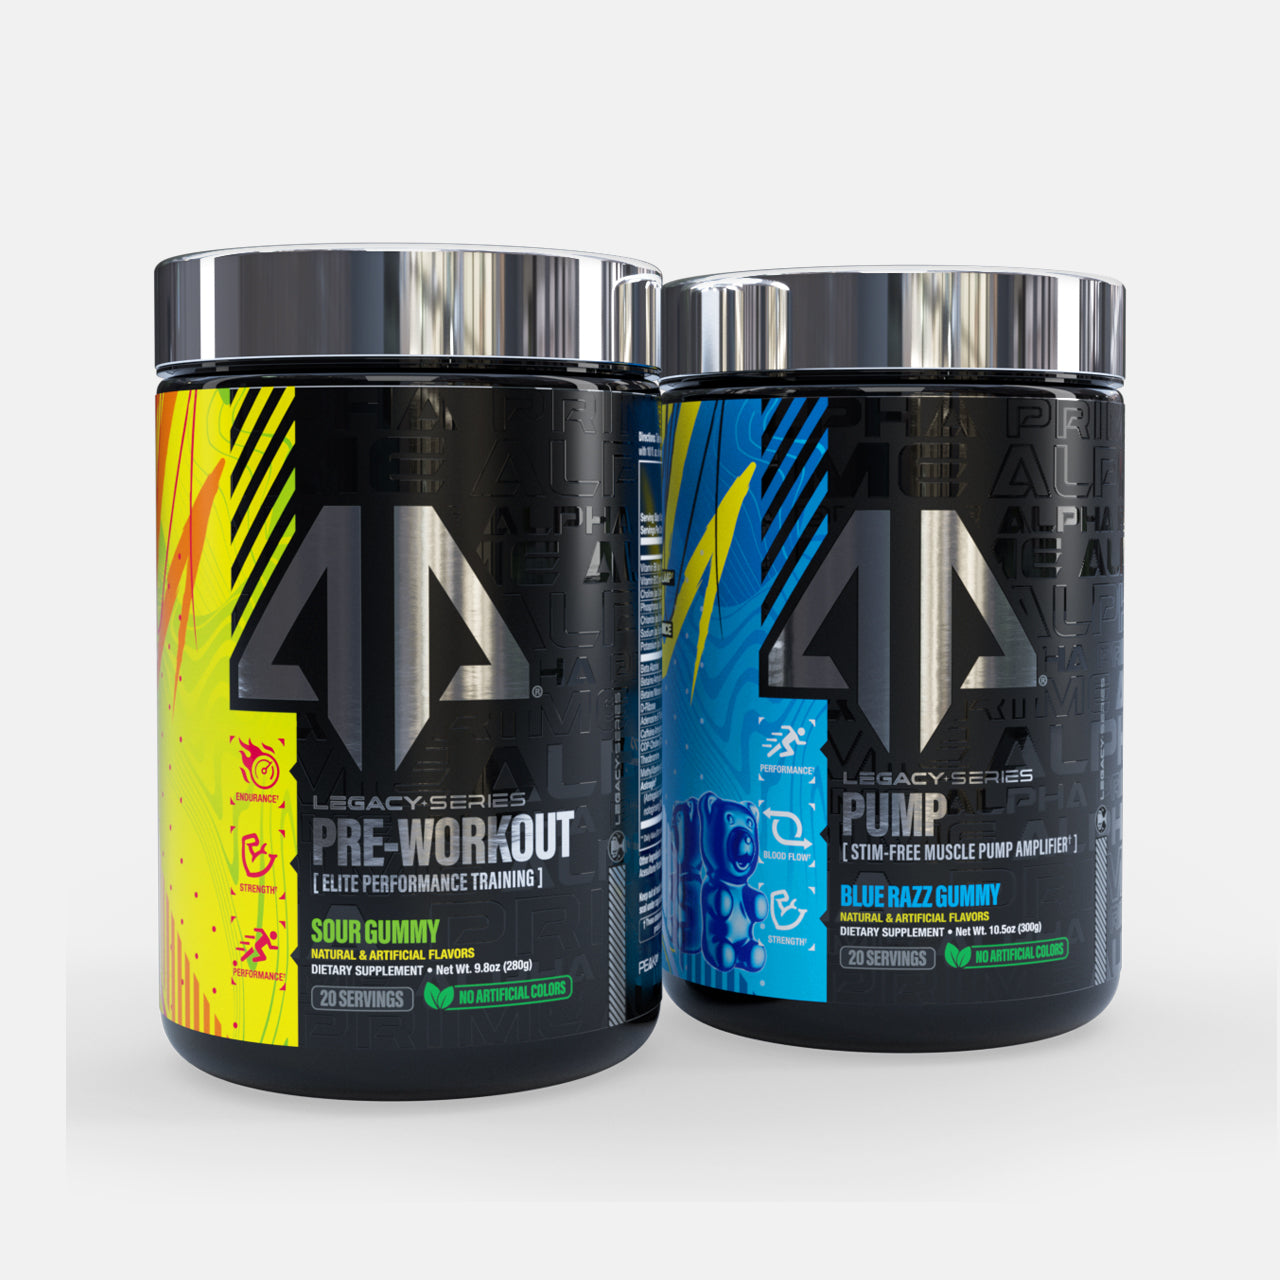 Alpha Pharaoh Pre-Workout – Well Sayed Labs